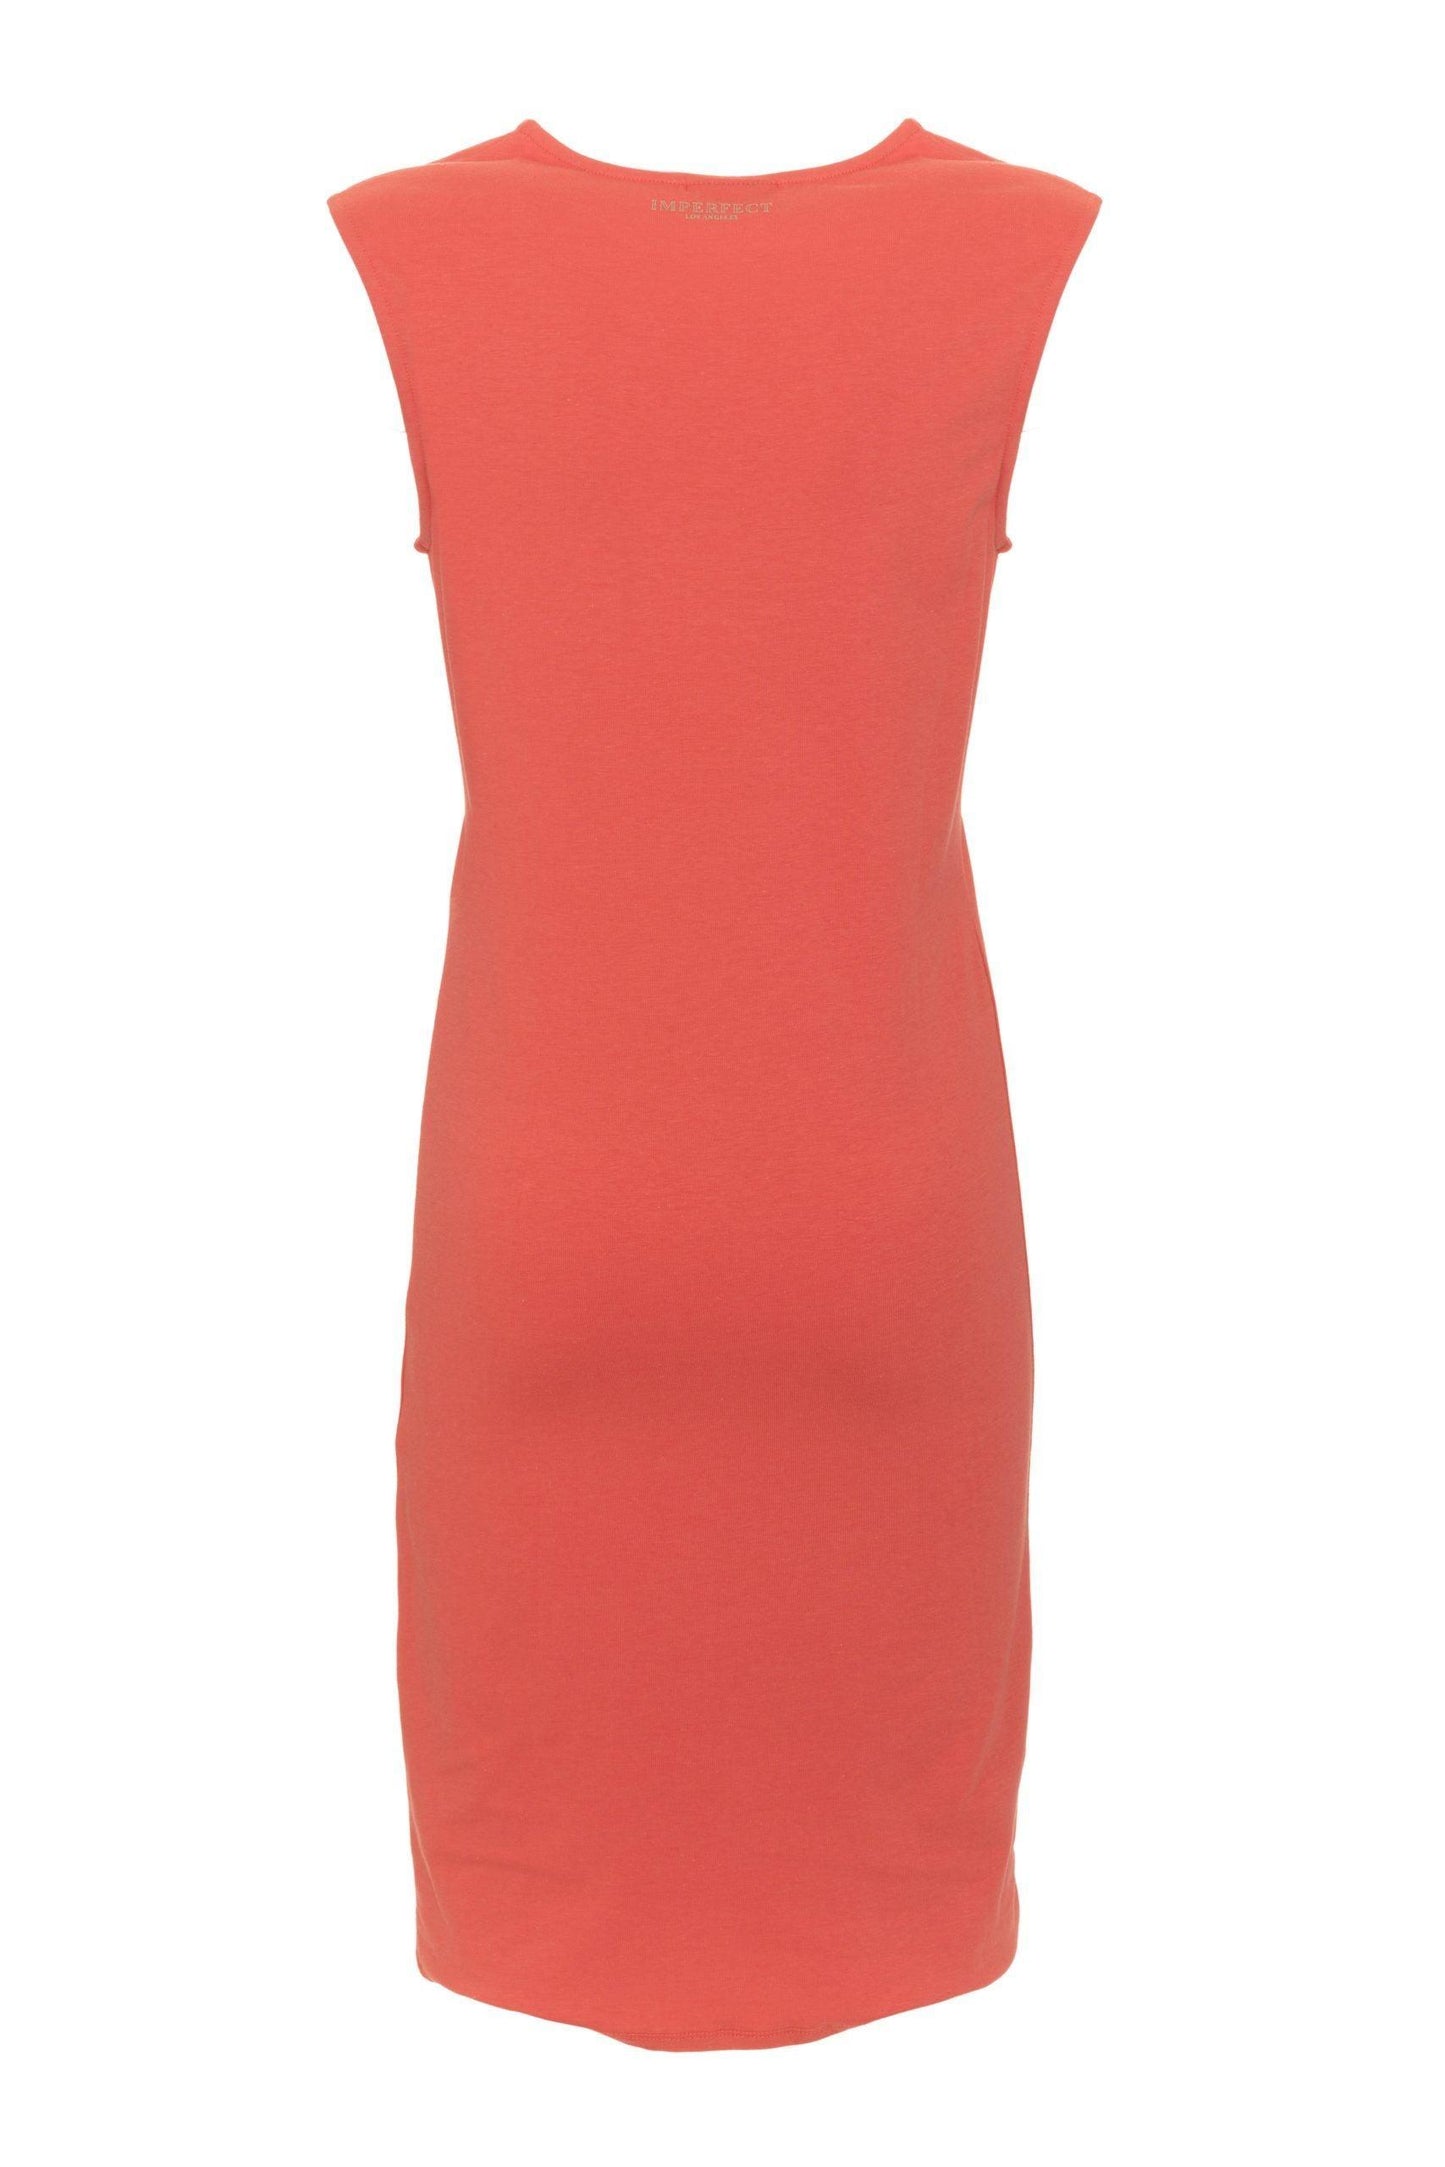 Imperfect Red Cotton Sleeveless Sheath Dress - Designed by Imperfect Available to Buy at a Discounted Price on Moon Behind The Hill Online Designer Discount Store